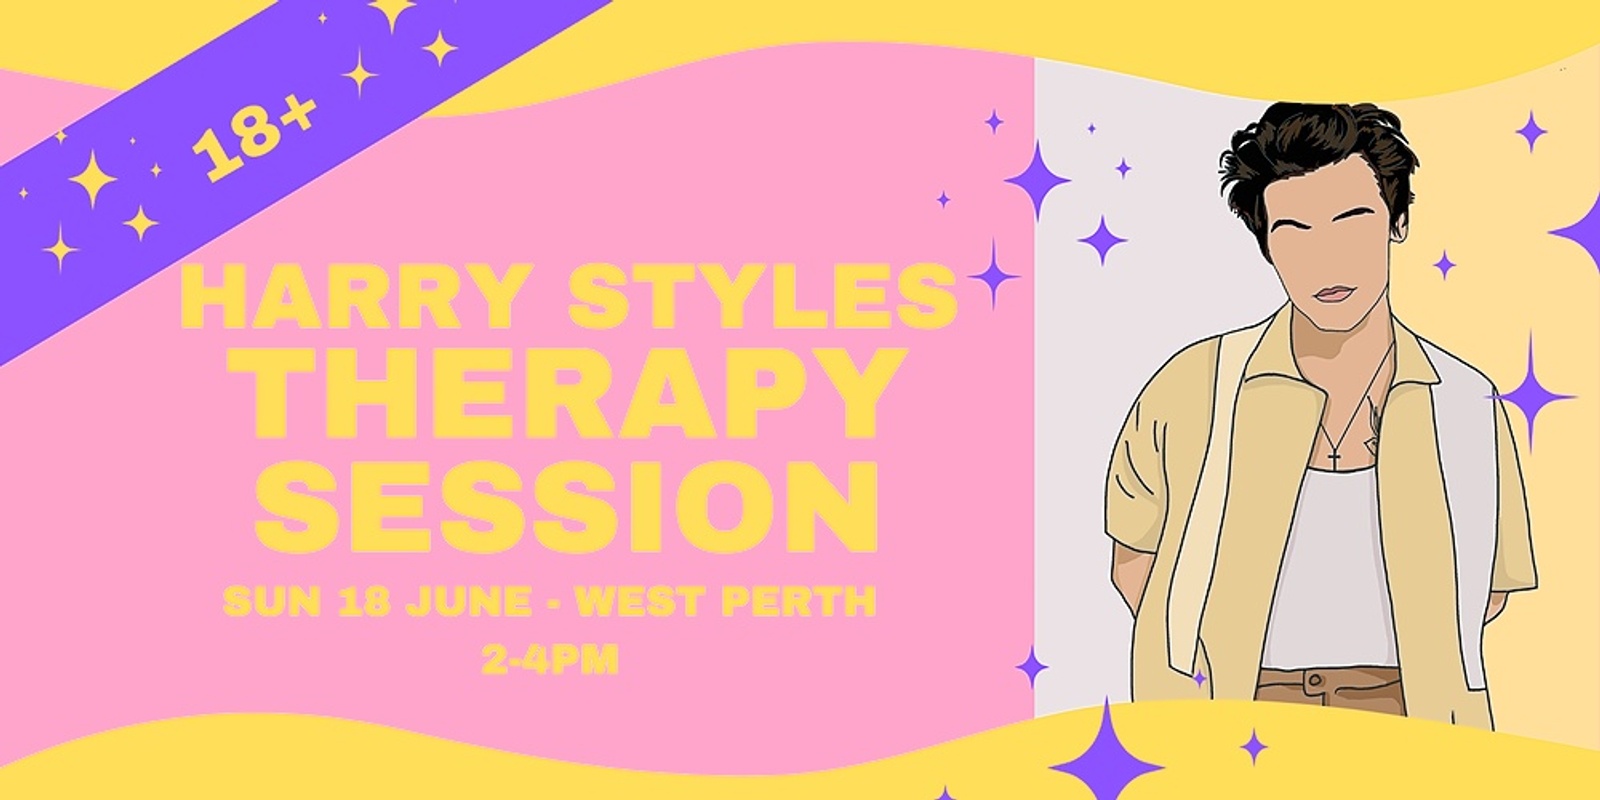 Harry Styles Therapy Session - June 18 (18+)